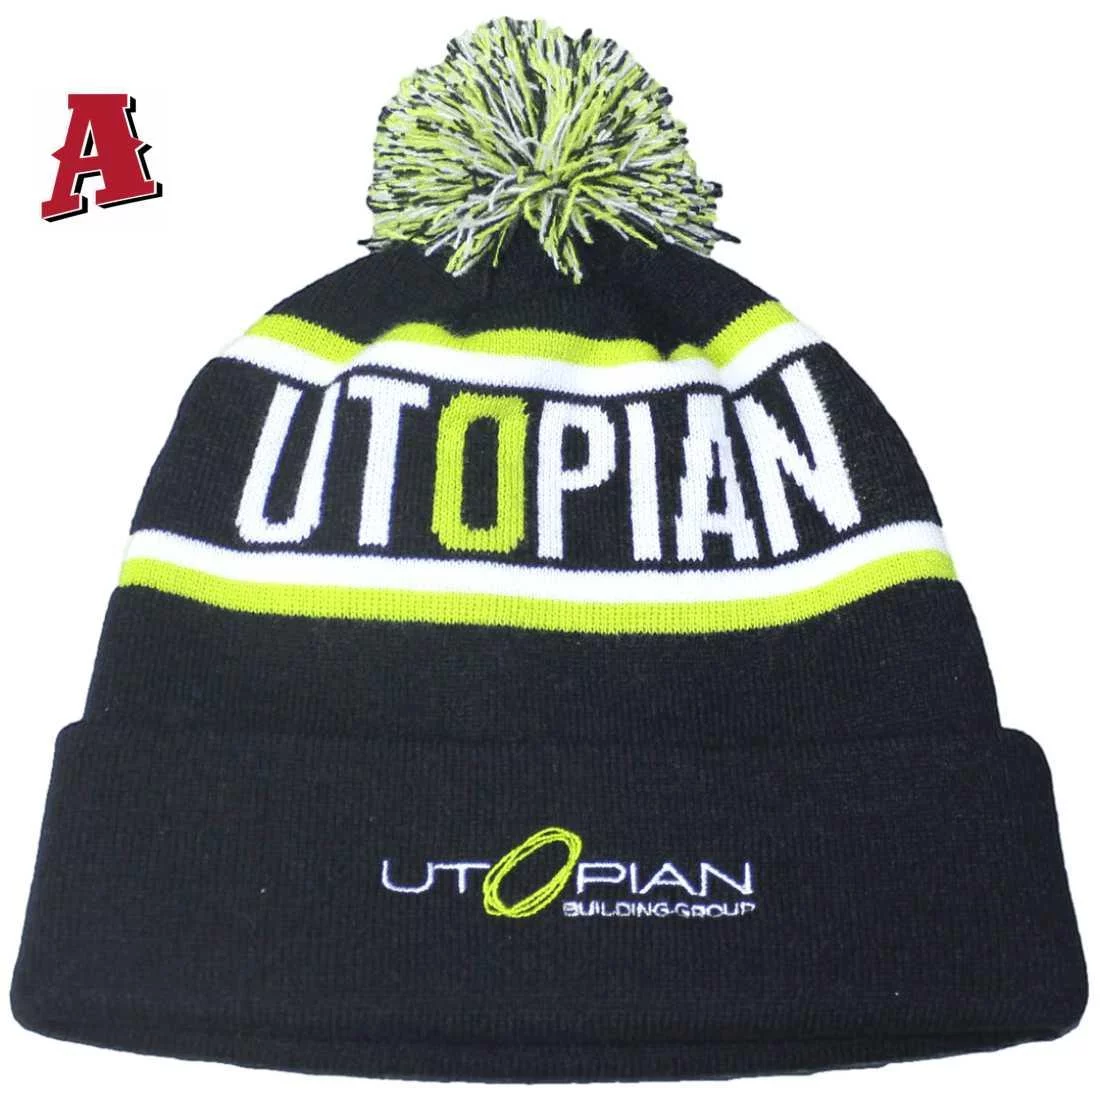 Utopian Building Group Braeside Victoria Aussie Custom Beanie with Pom POM and Roll-up Cuff One Size Fits All Black Green White